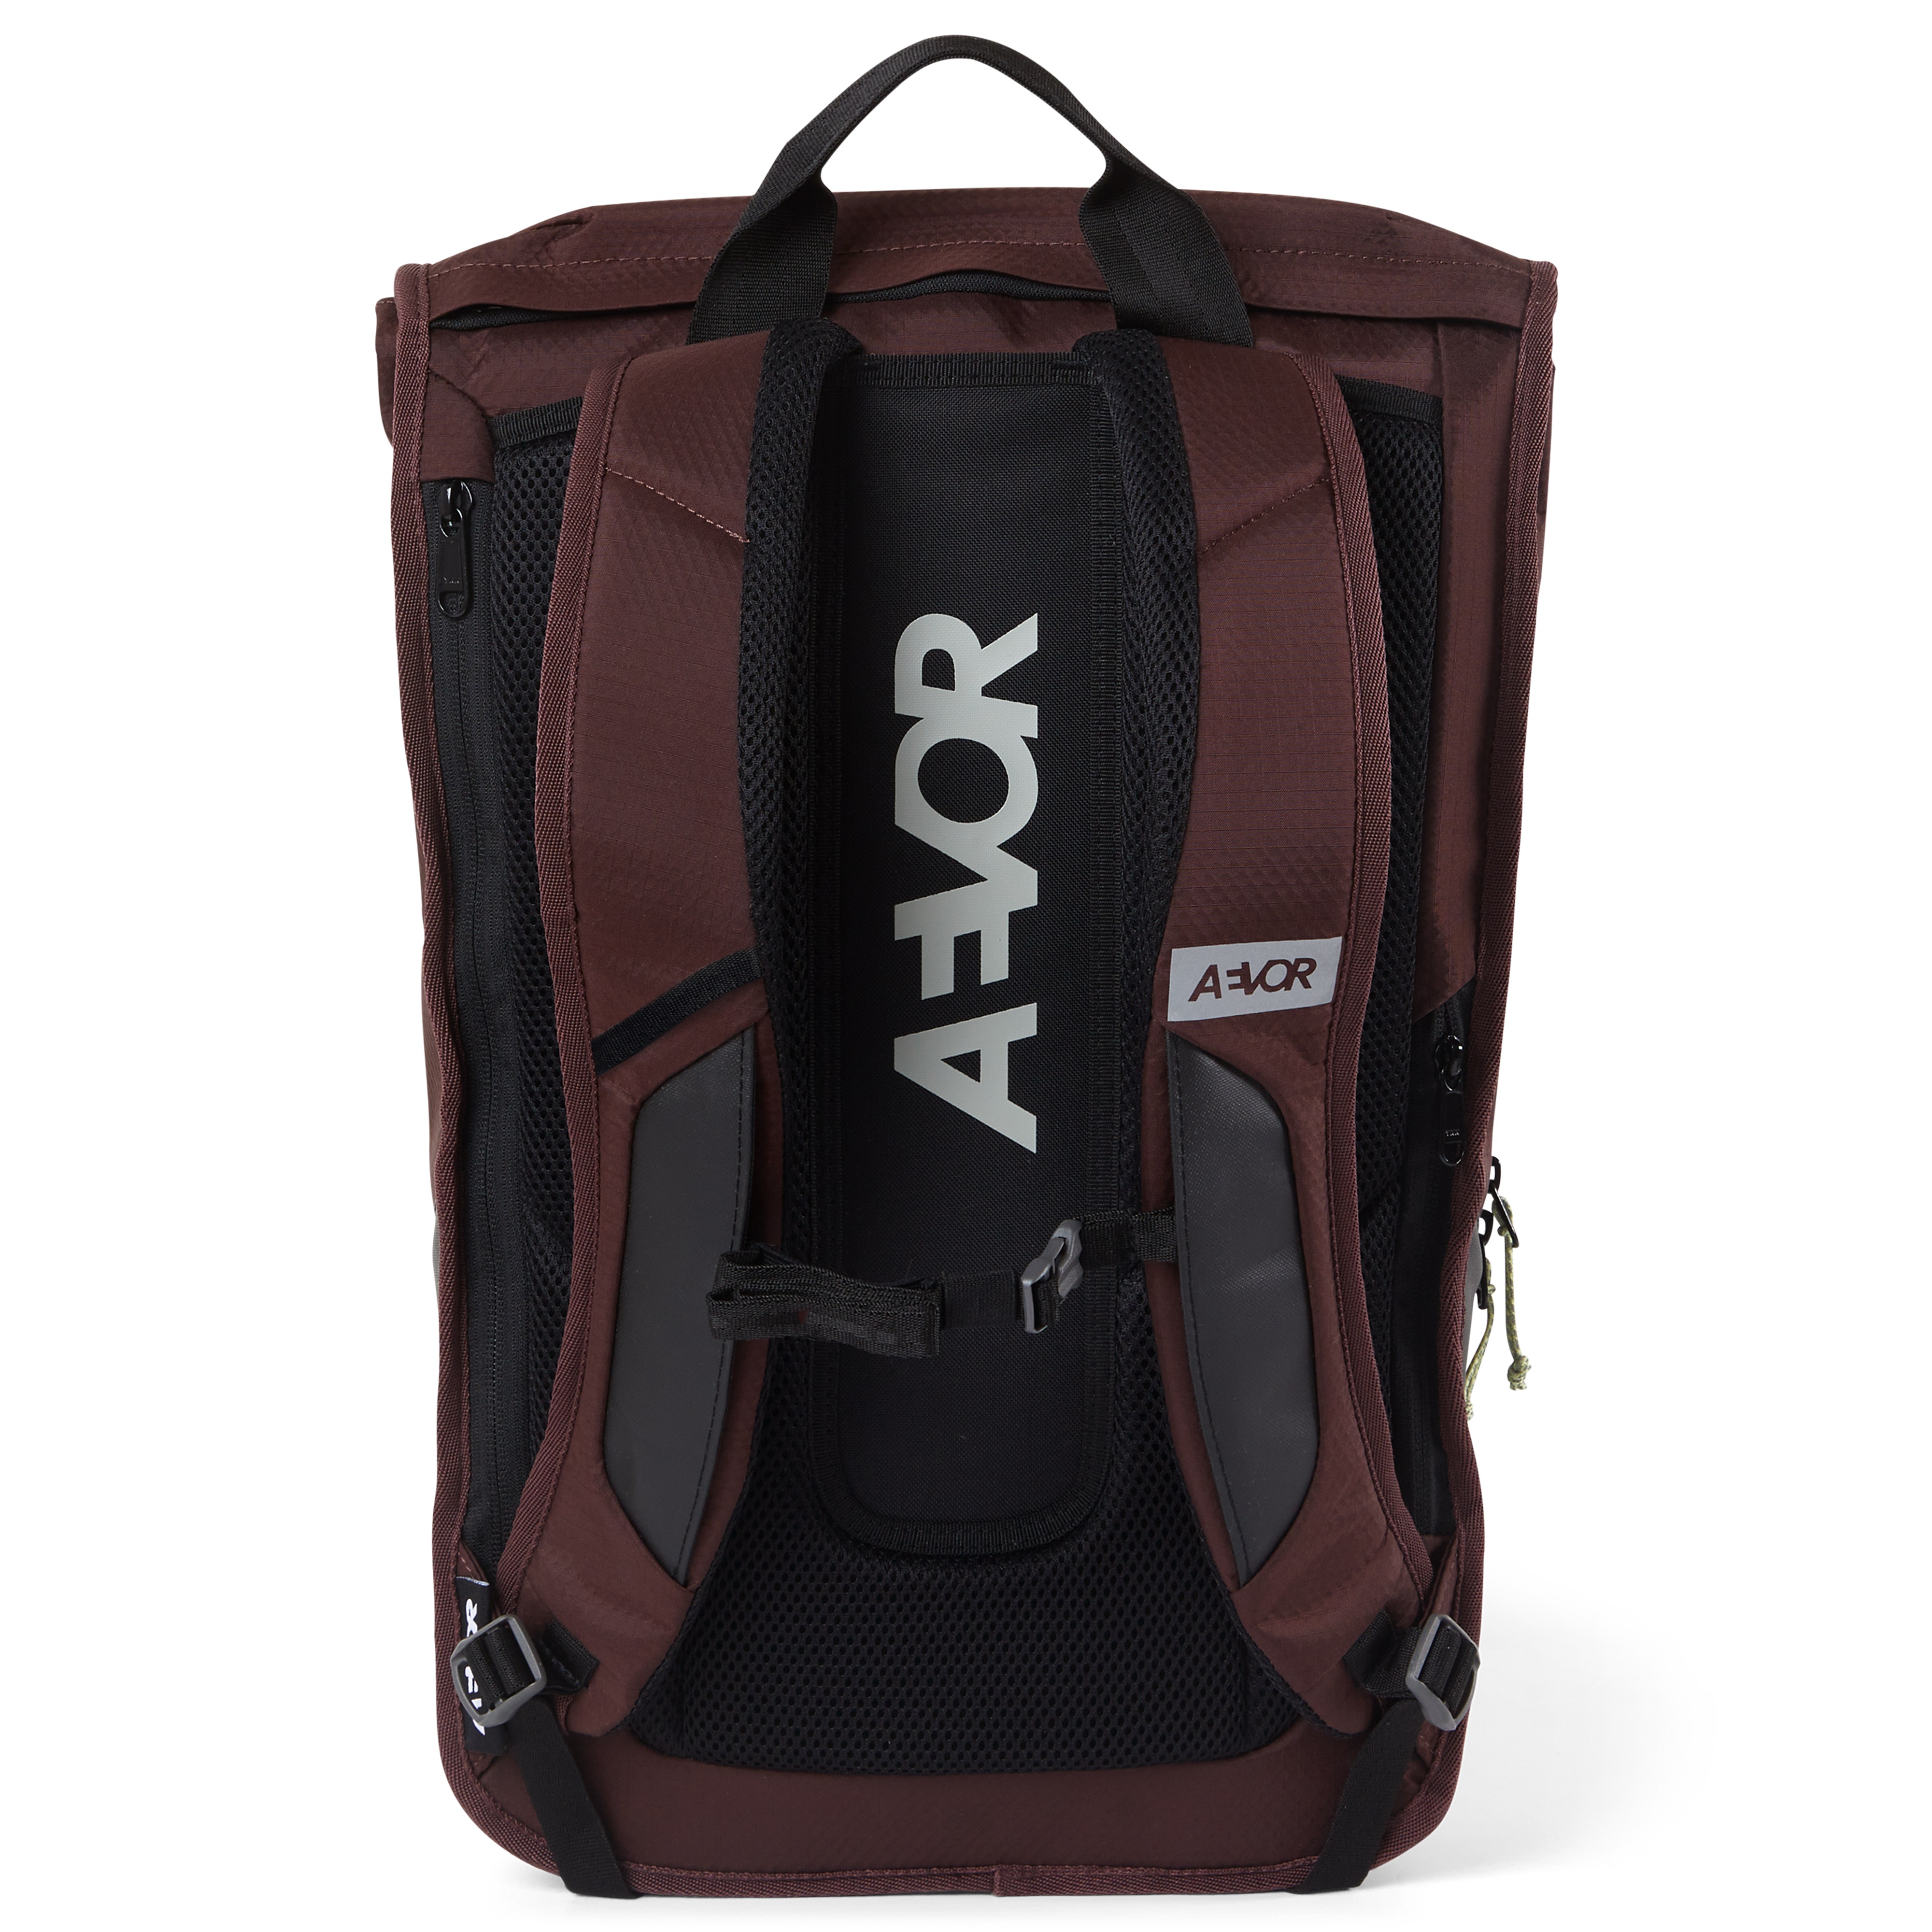 Aevor - DAY PACK - Proof Maroon